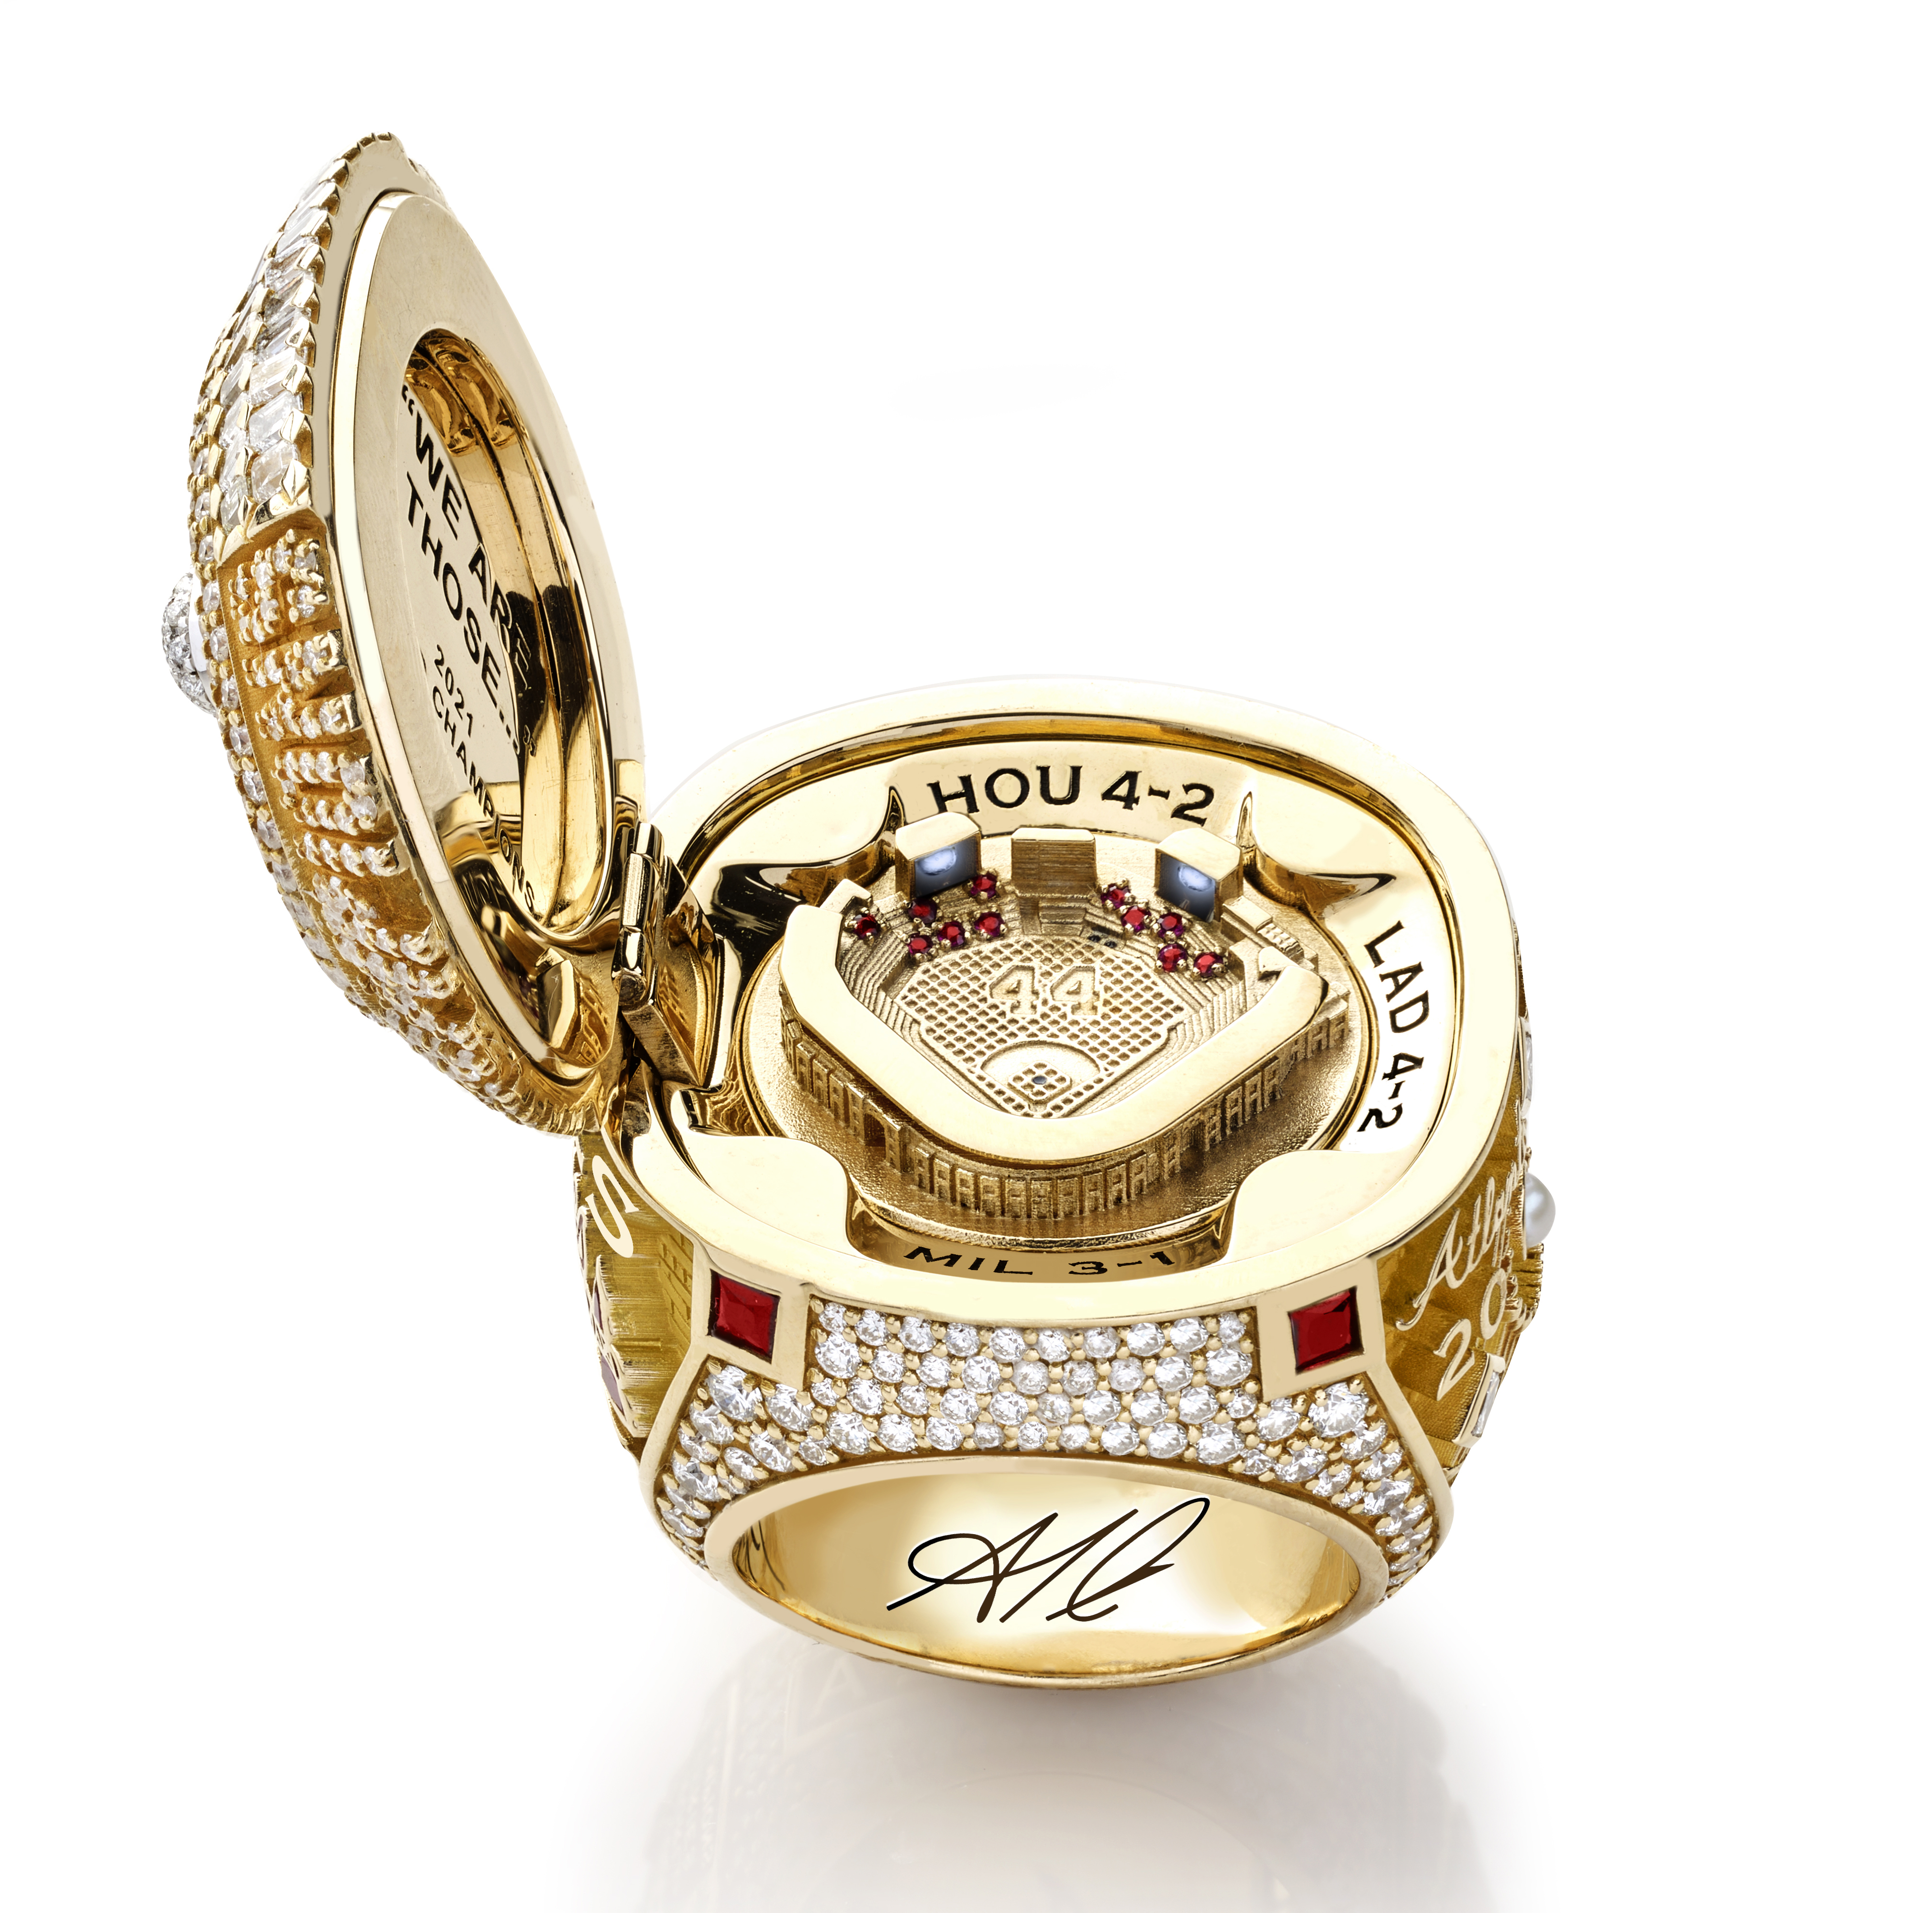 Braves World Series championship rings embody highlights from a